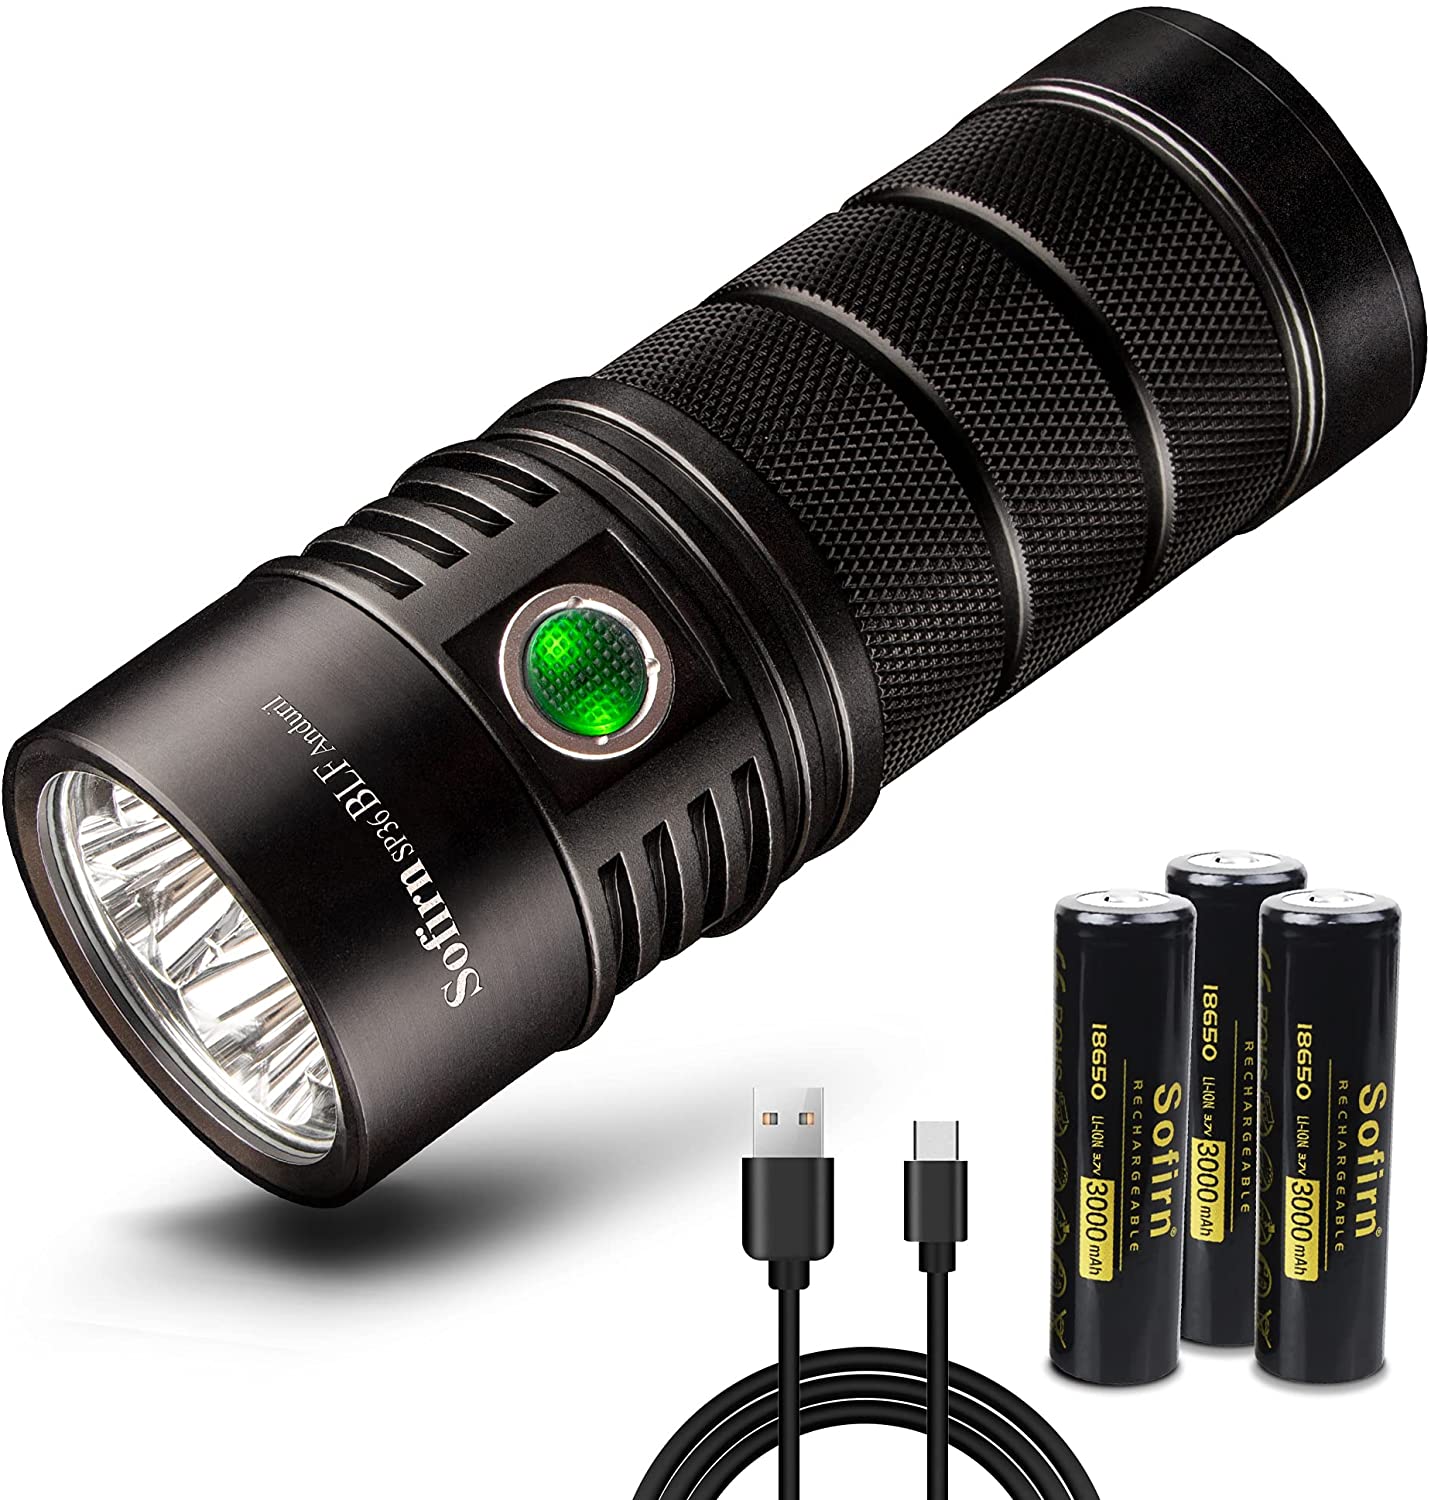 Sofirn SP36 BLF Rechargeable Flashlight 5000-Lumens - $46.69 (30% off) + Free Shipping